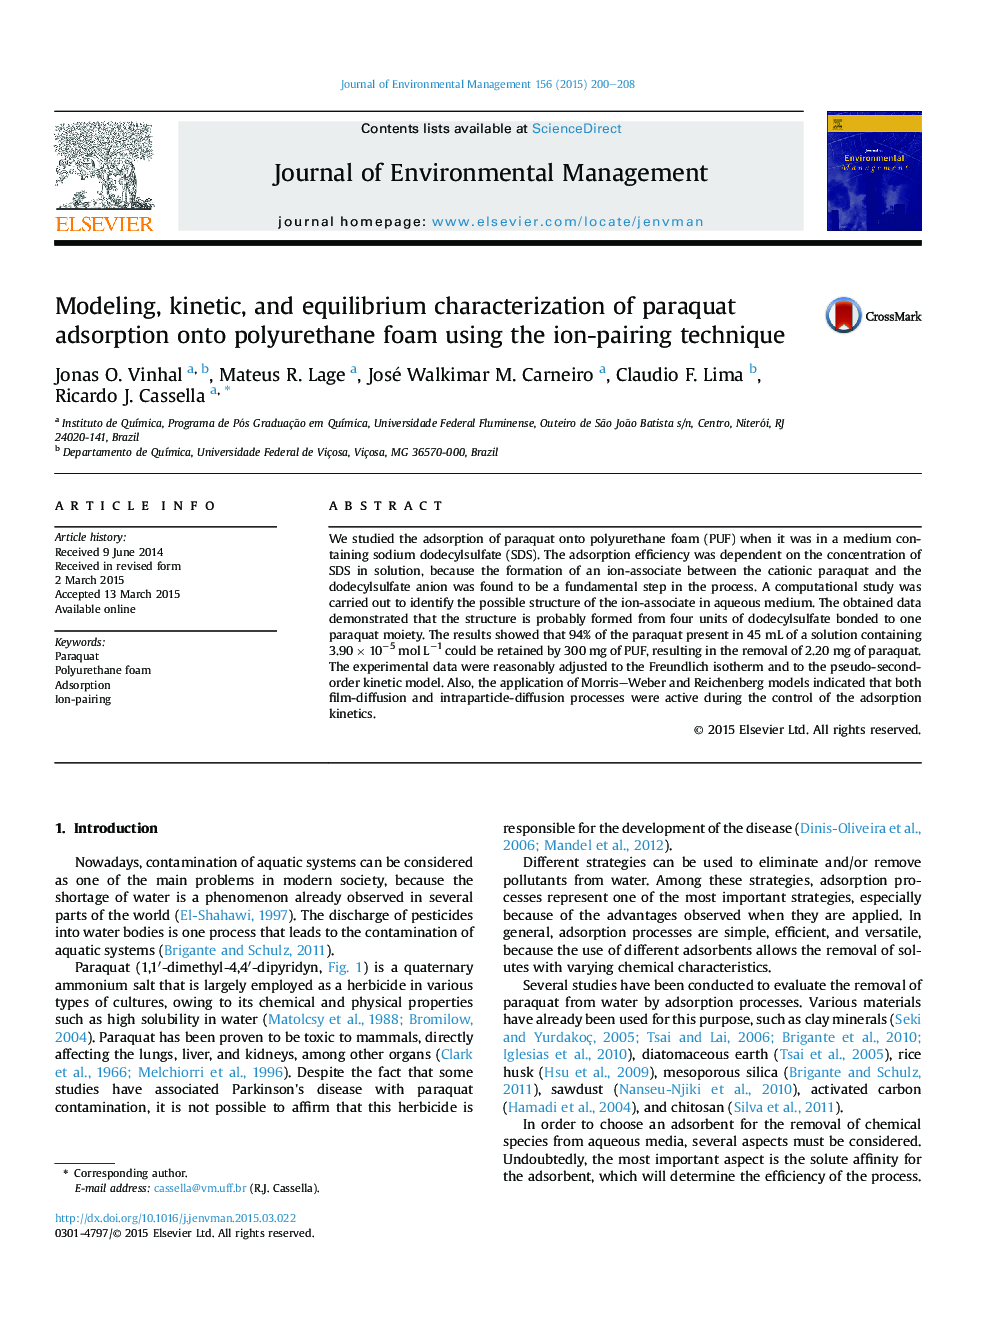 Modeling, kinetic, and equilibrium characterization of paraquat adsorption onto polyurethane foam using the ion-pairing technique